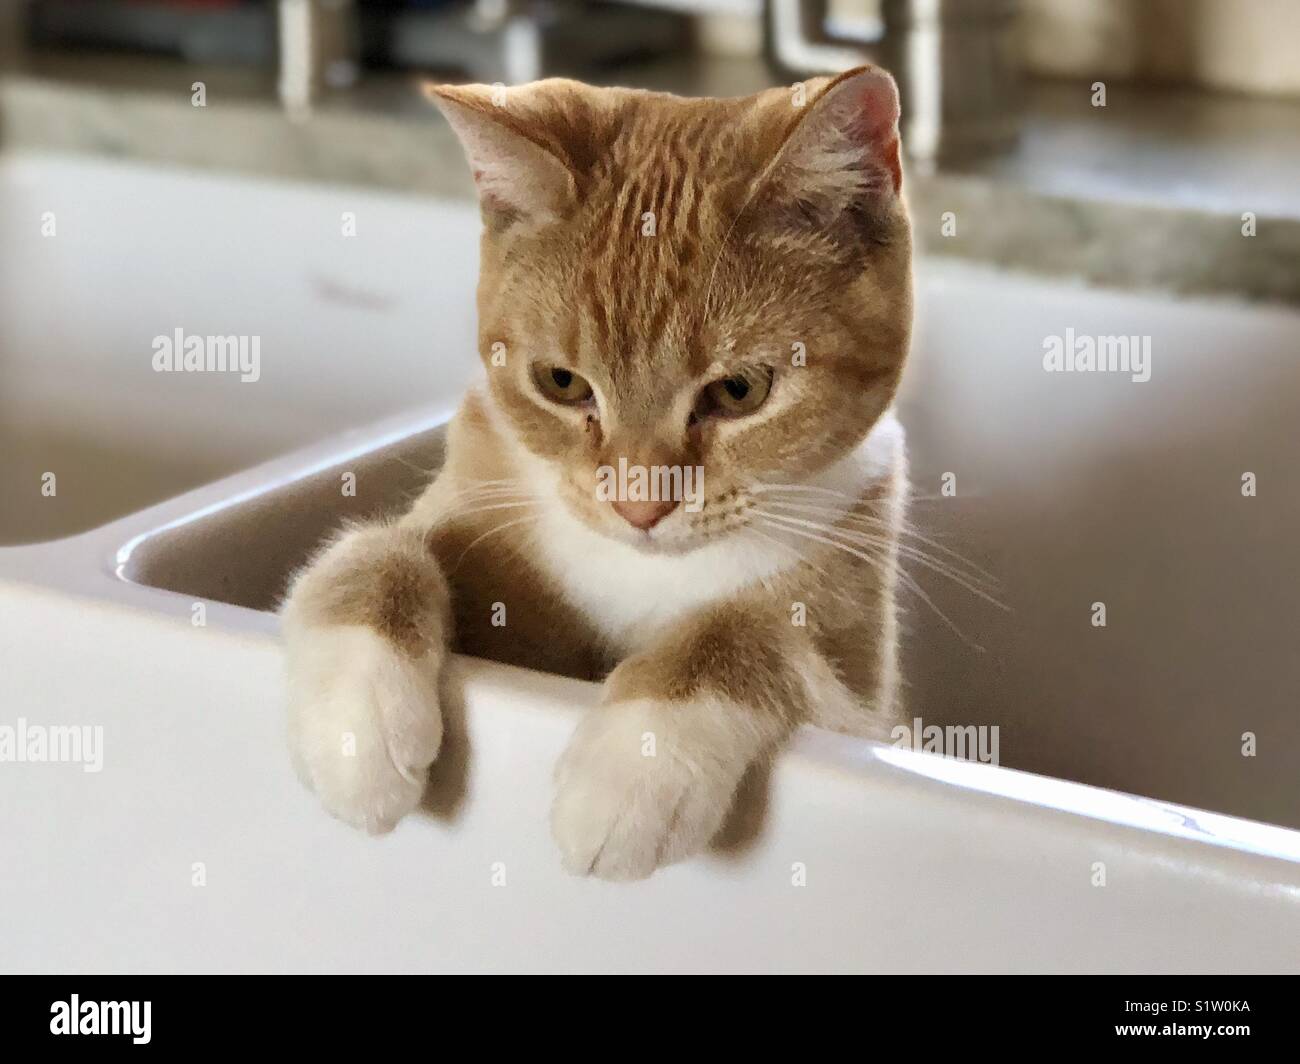 Cat Spying in a Sink Stock Photo